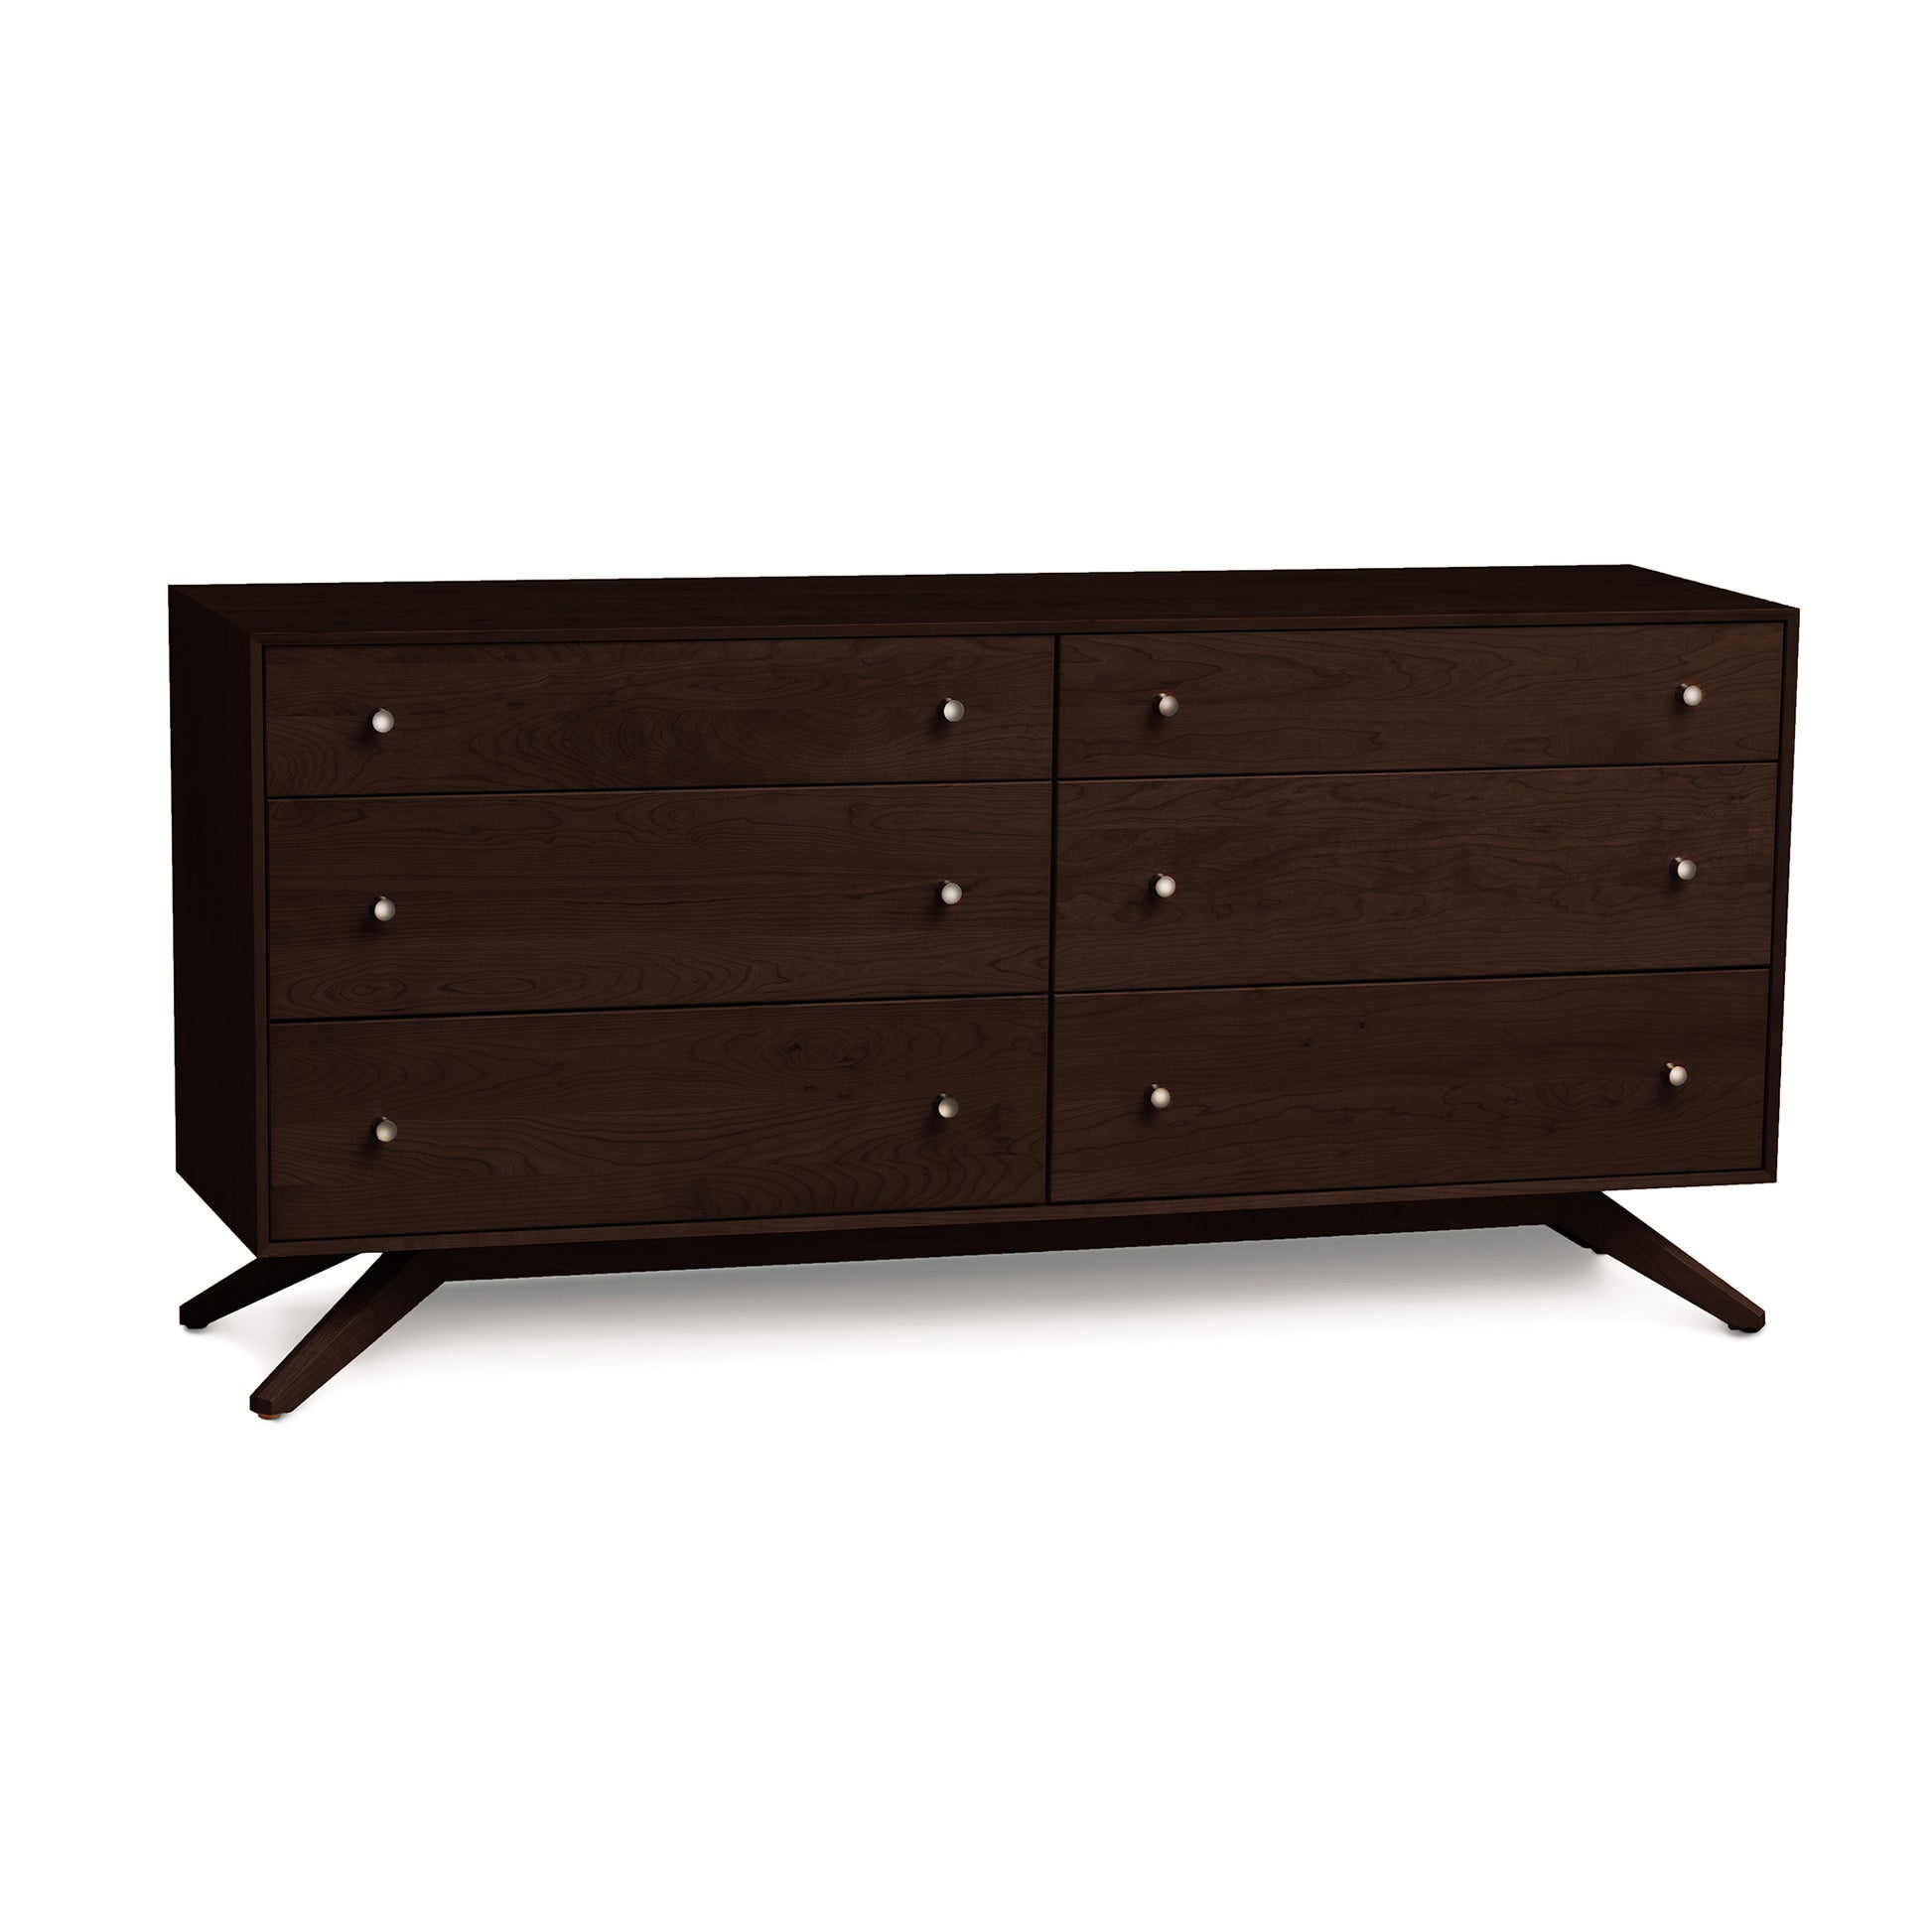 A modern Astrid six-drawer dresser with angled legs by Copeland Furniture on a white background.